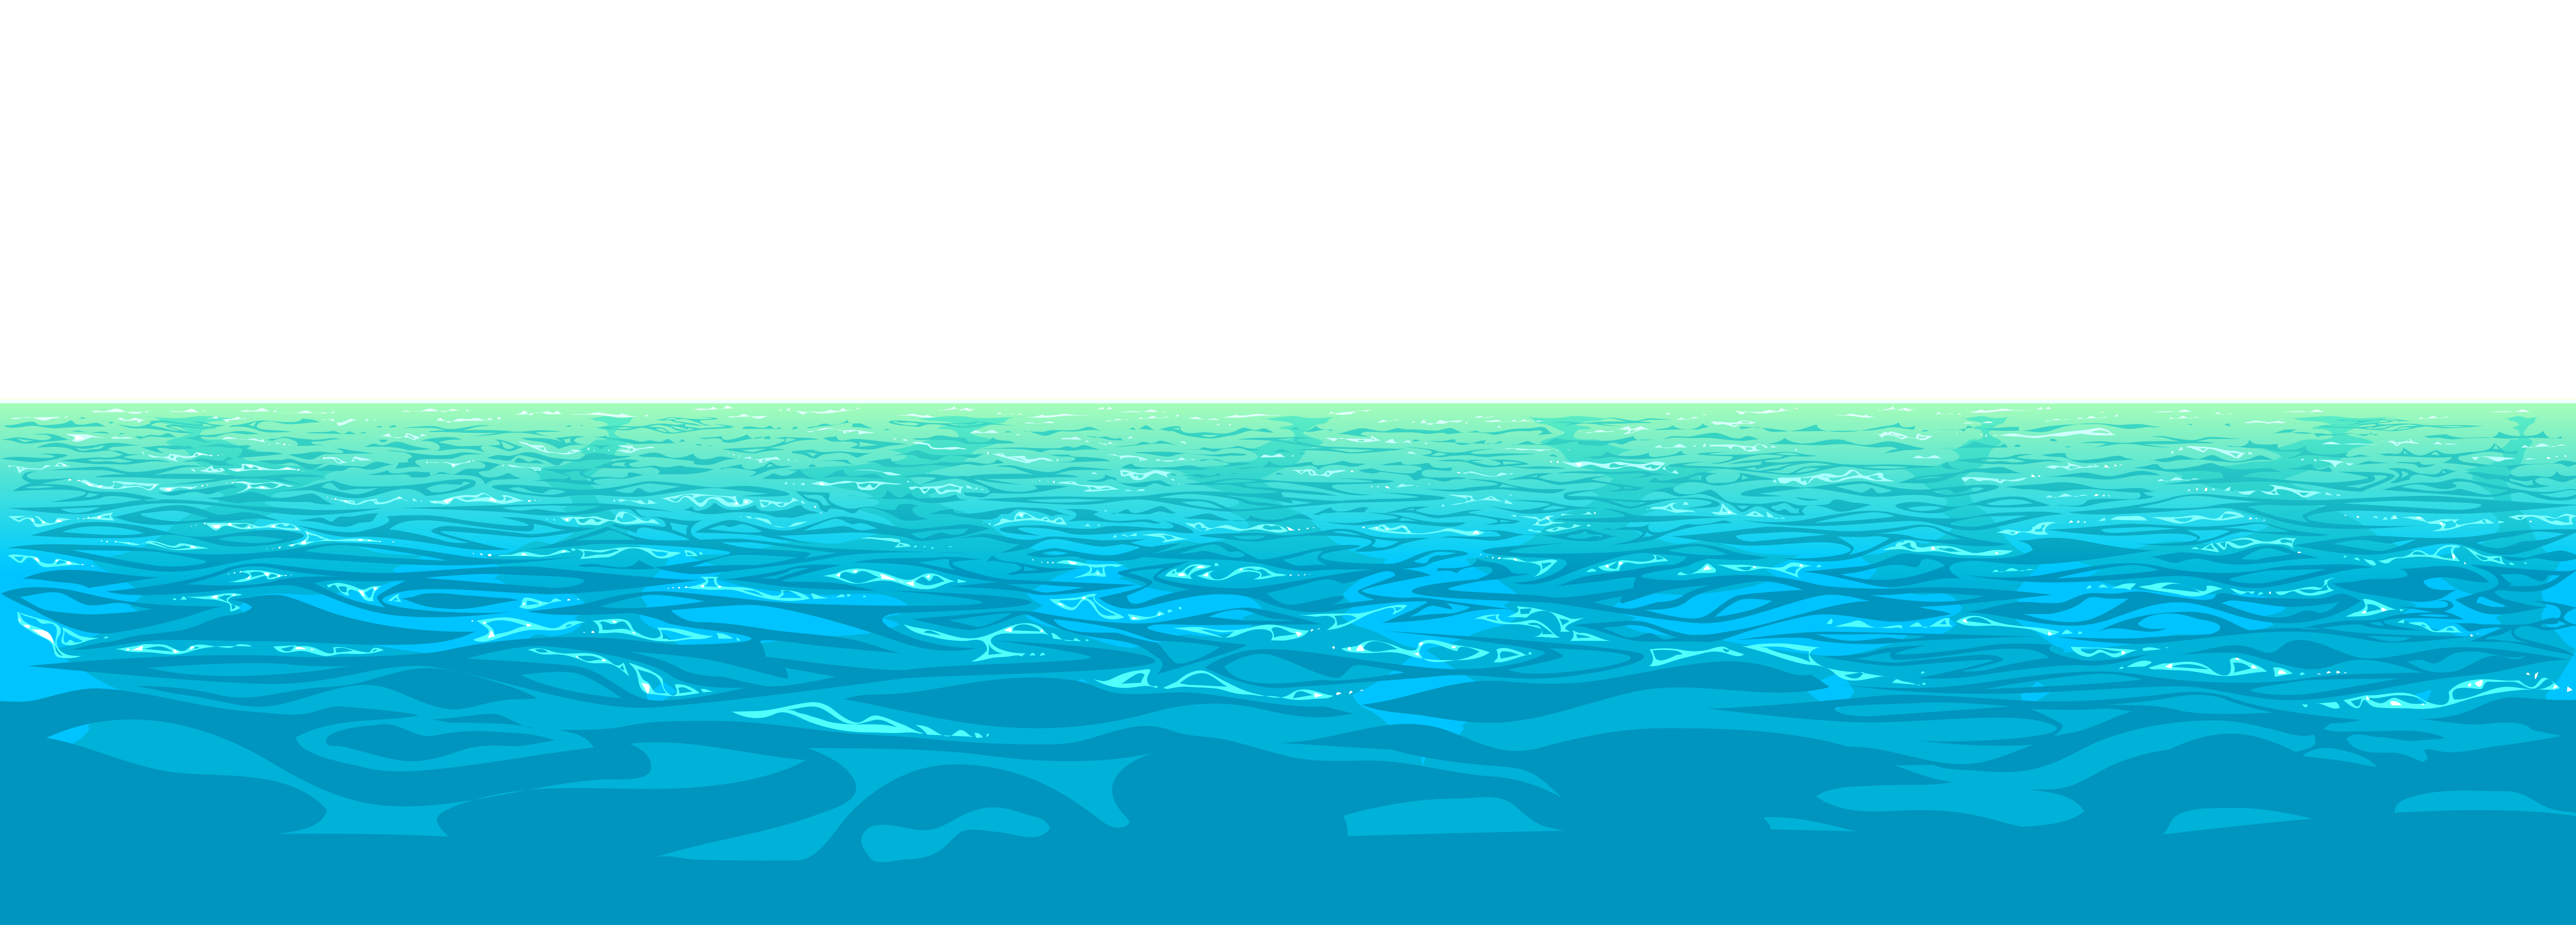 Waves clipart seawater.  collection of ocean